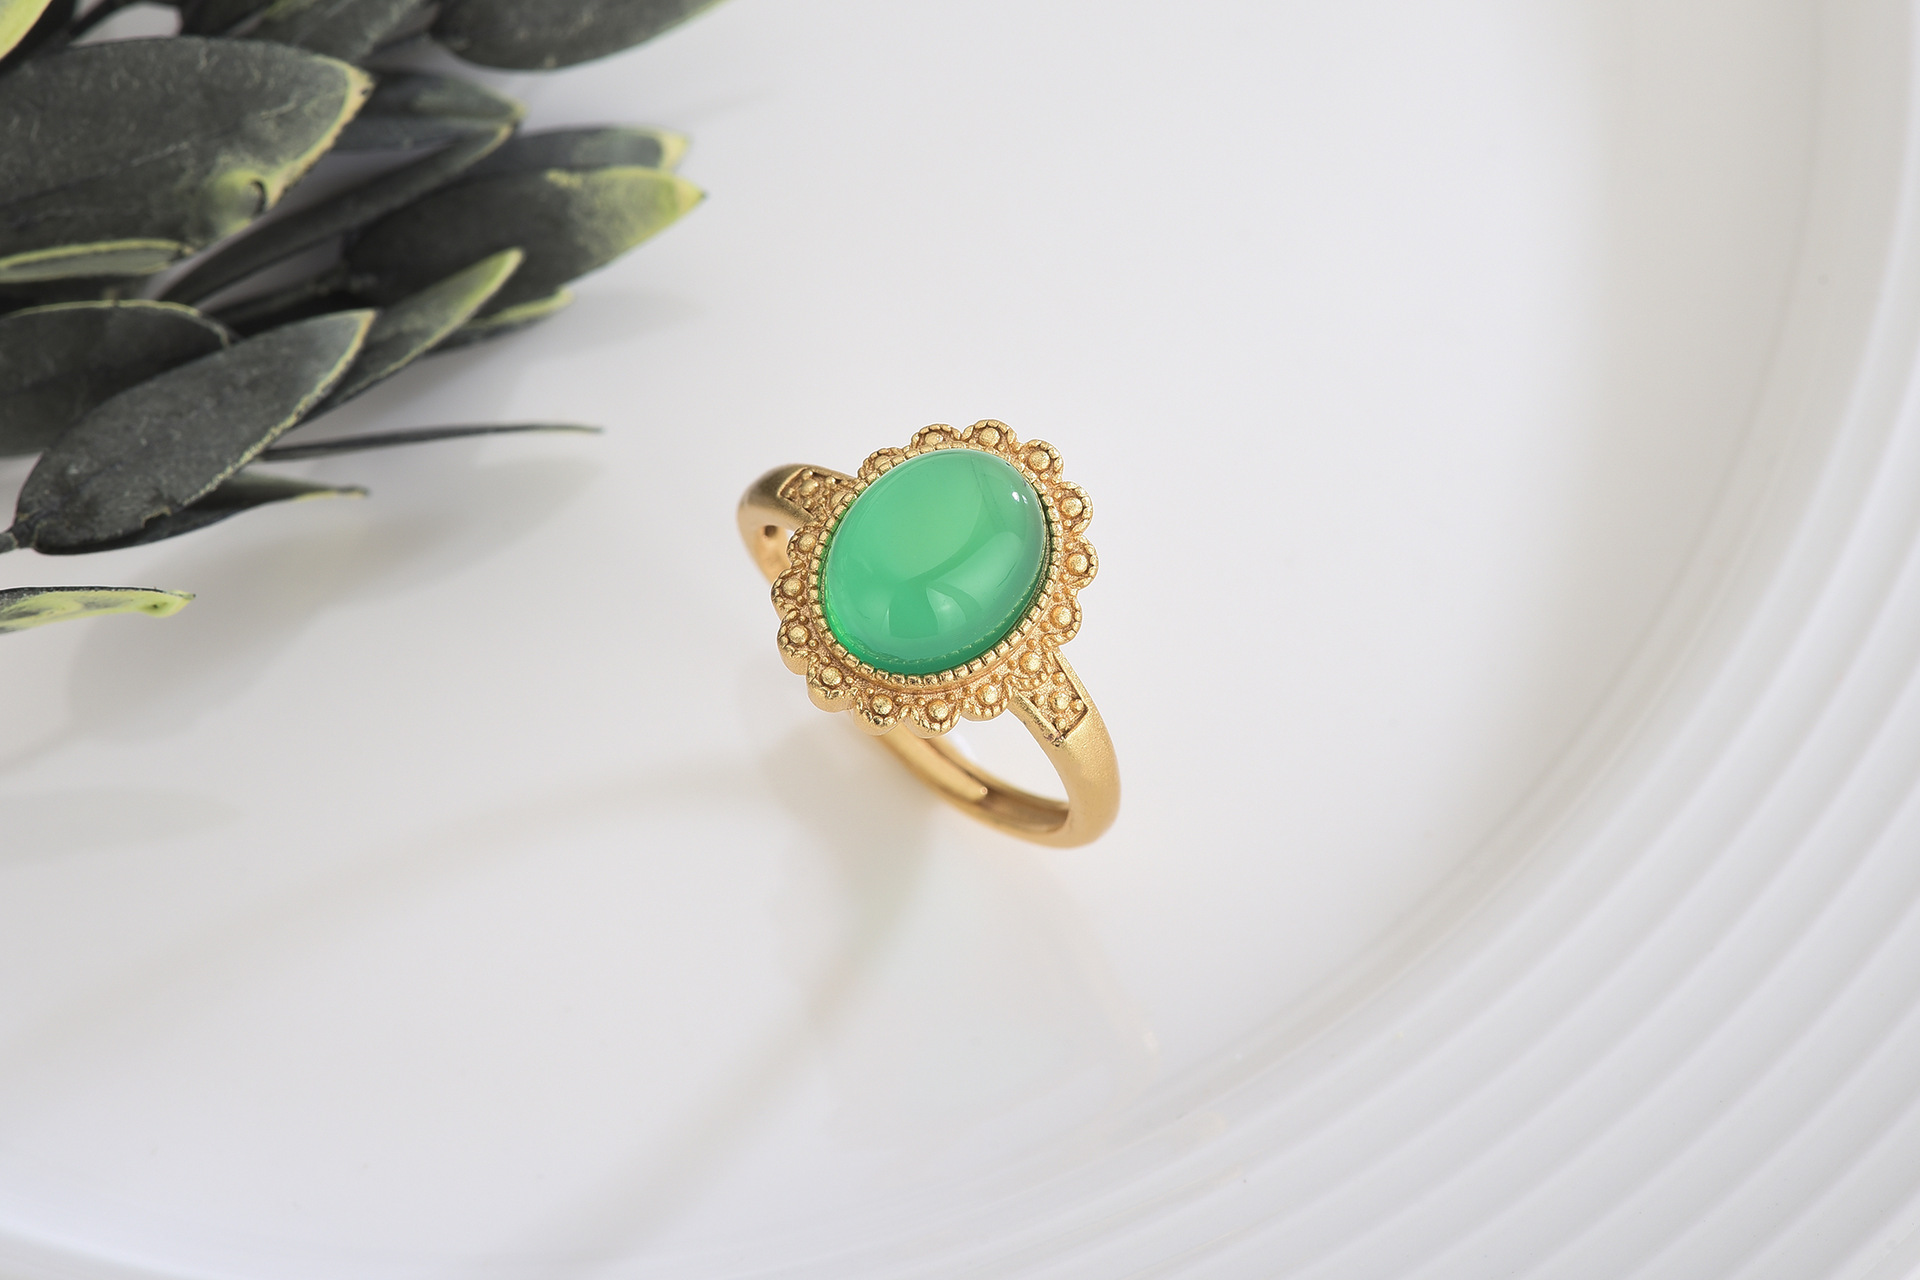 2:8x10mm ring (including chrysoprase) with adjustable opening